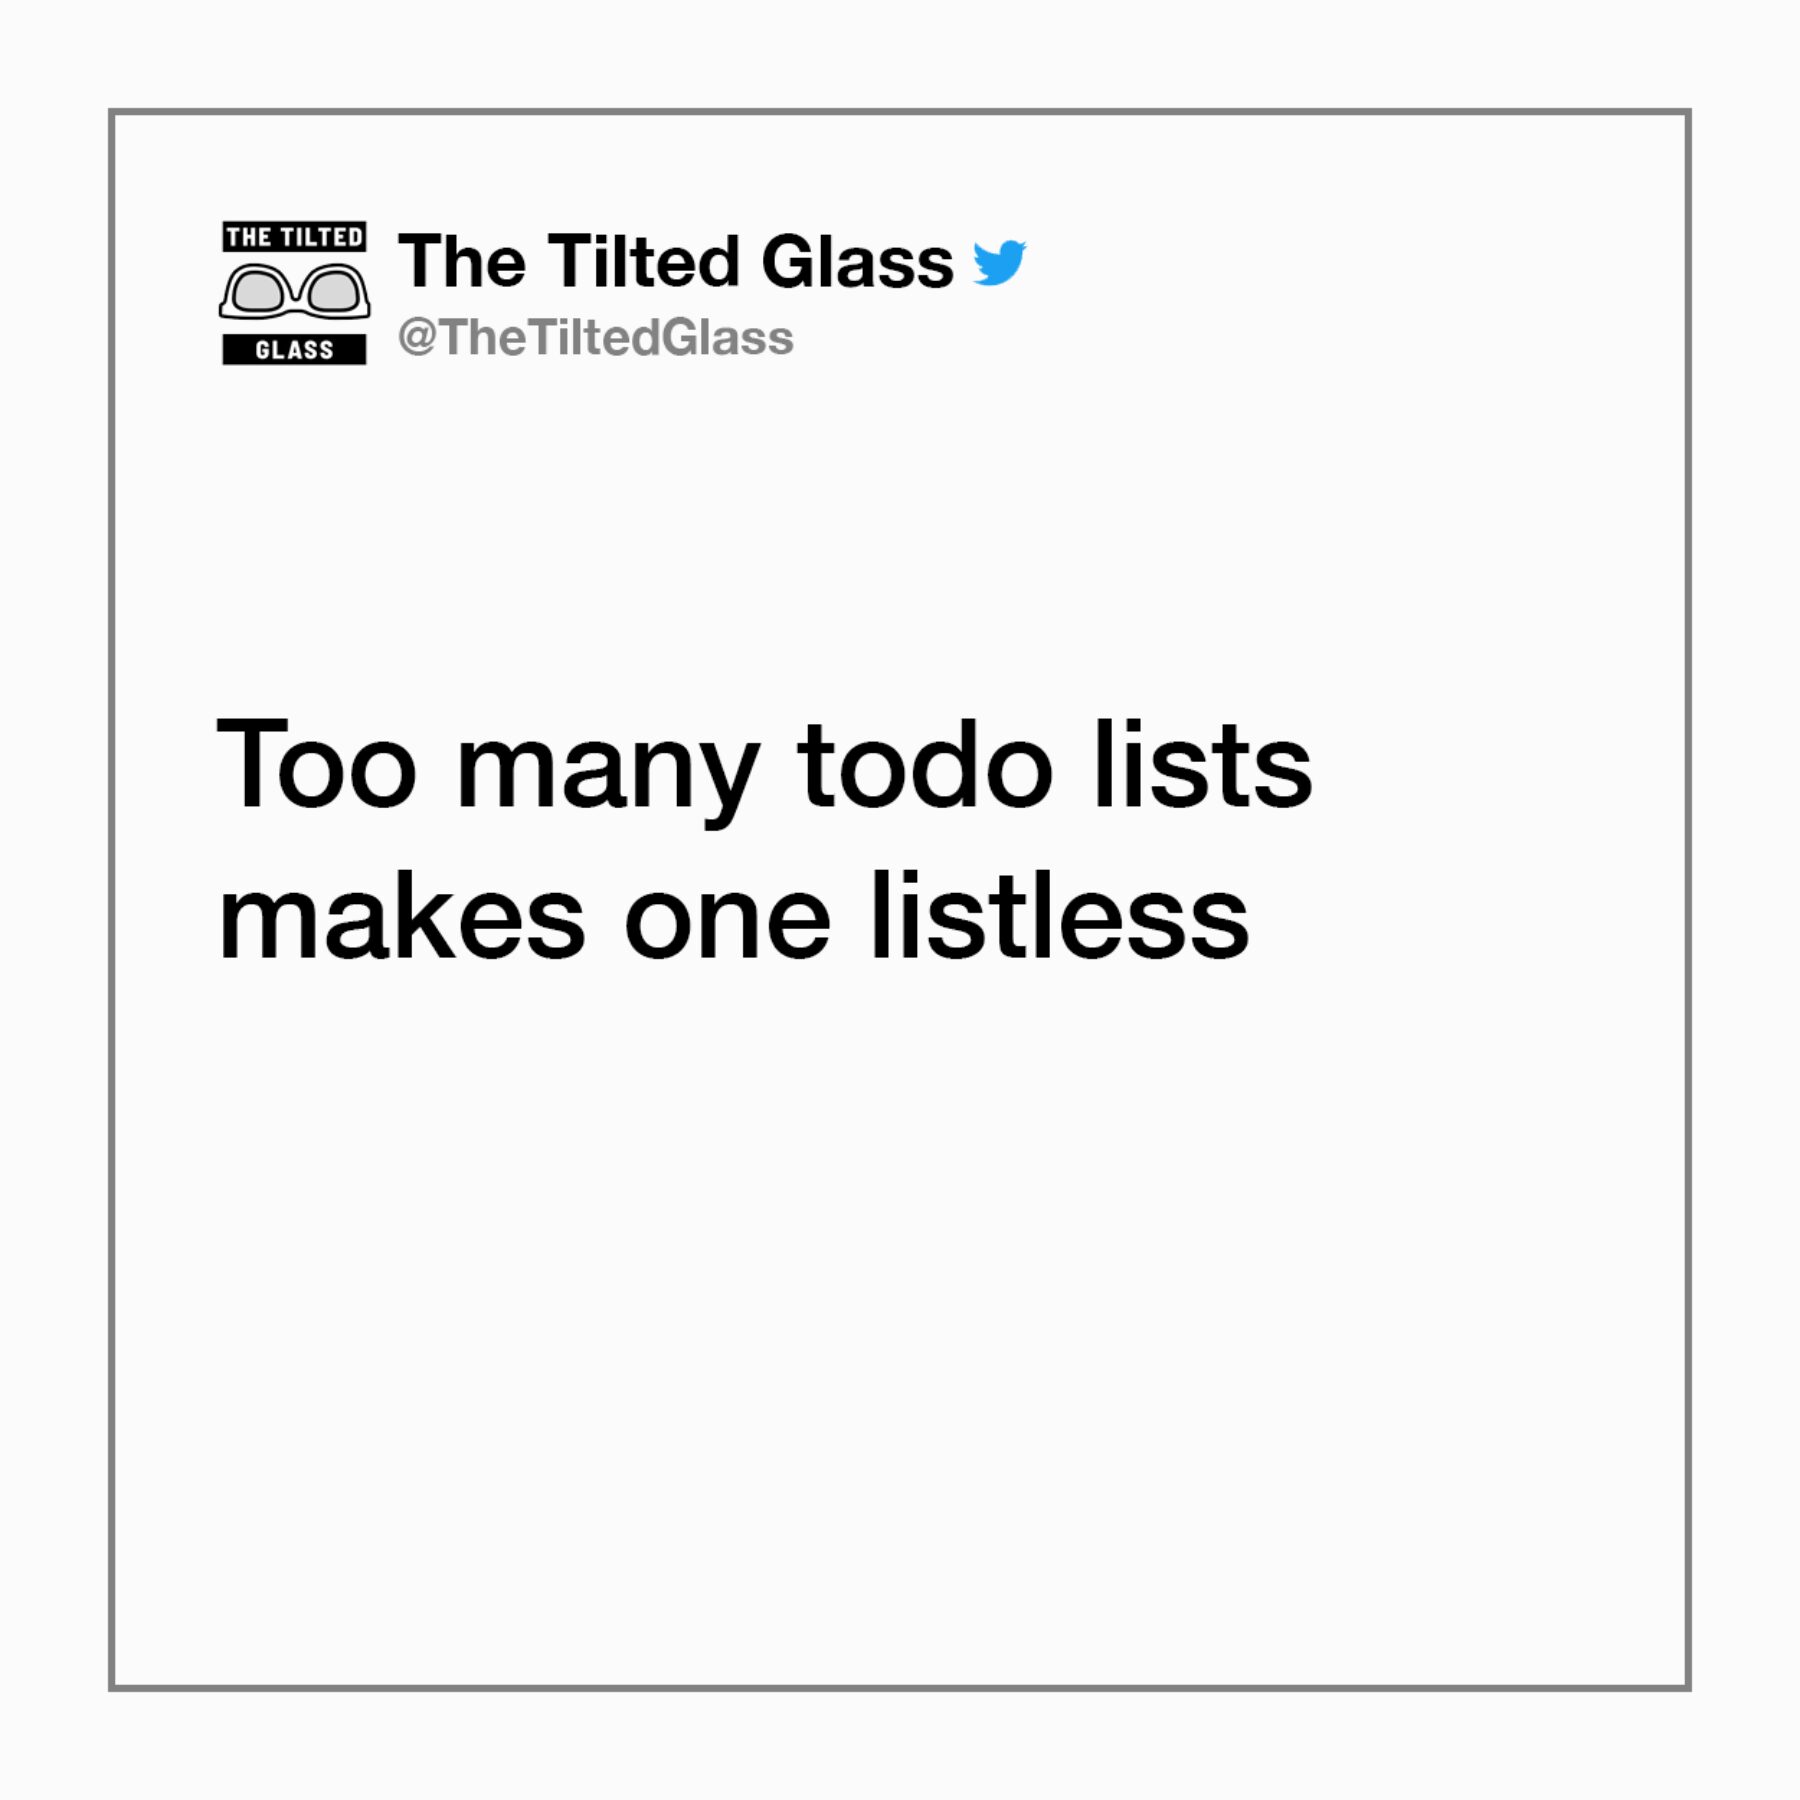 Too many todo lists makes one listless